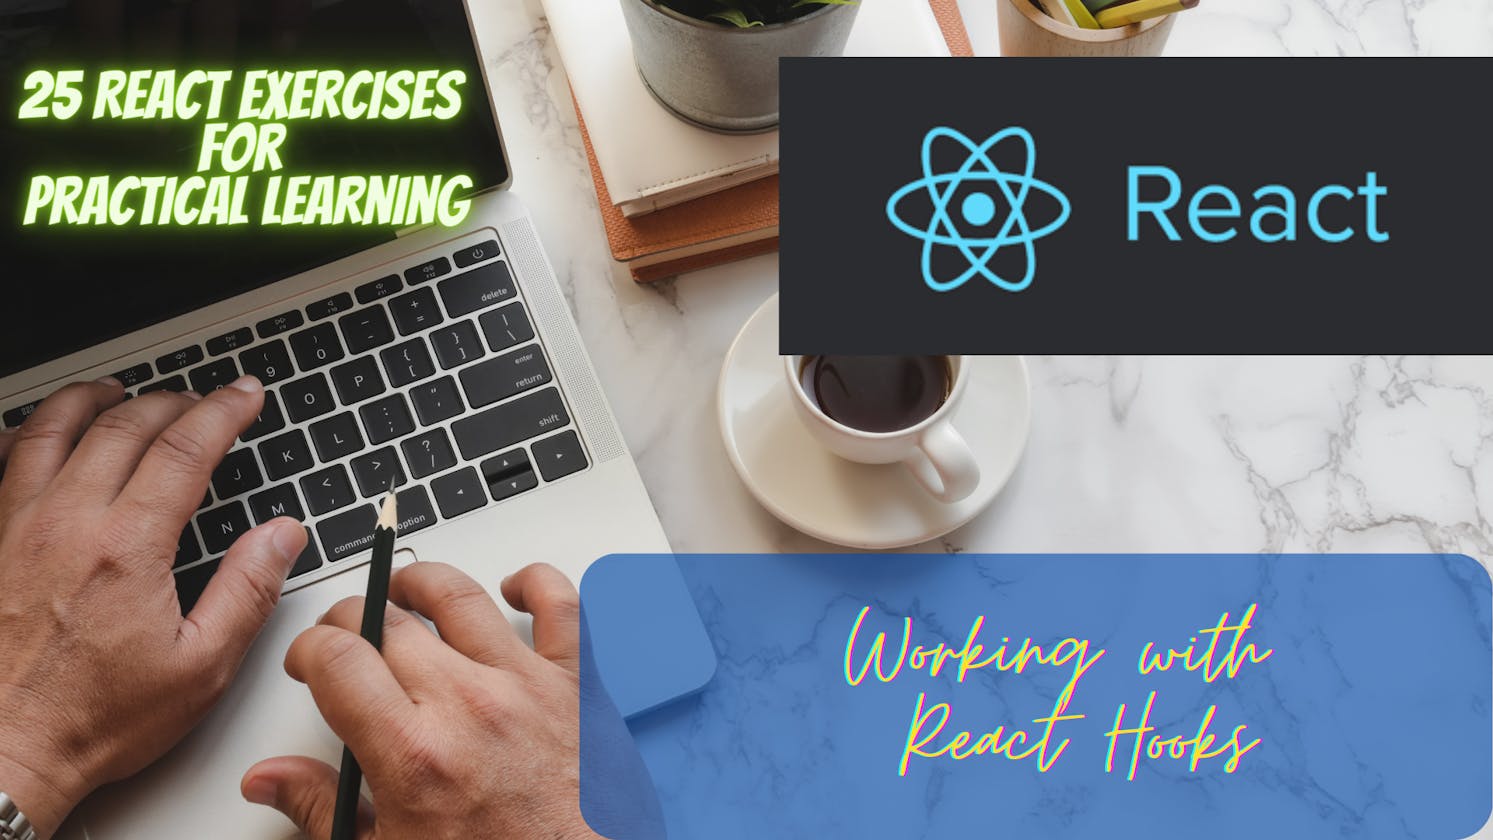 Working with React Hooks: A Practical Exercise for Beginners